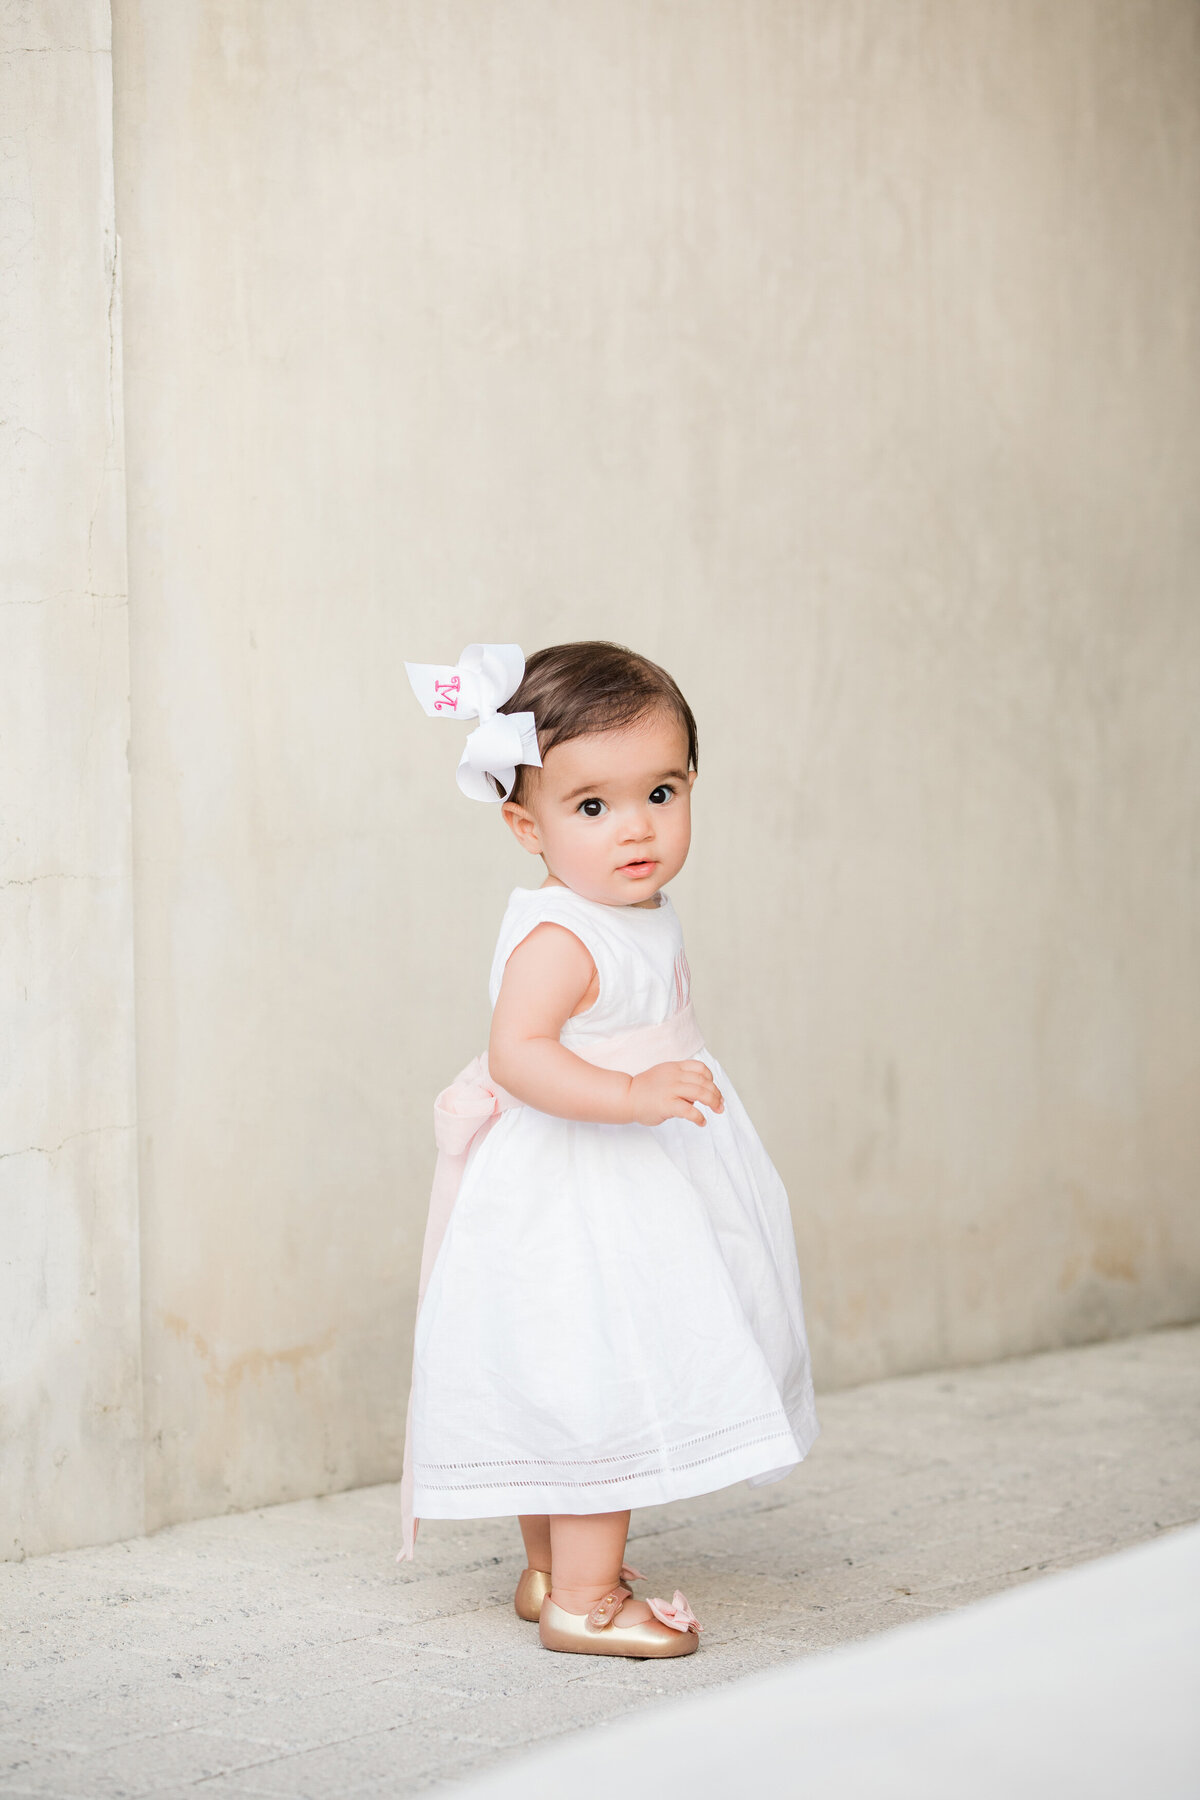 A small baby in a white dress